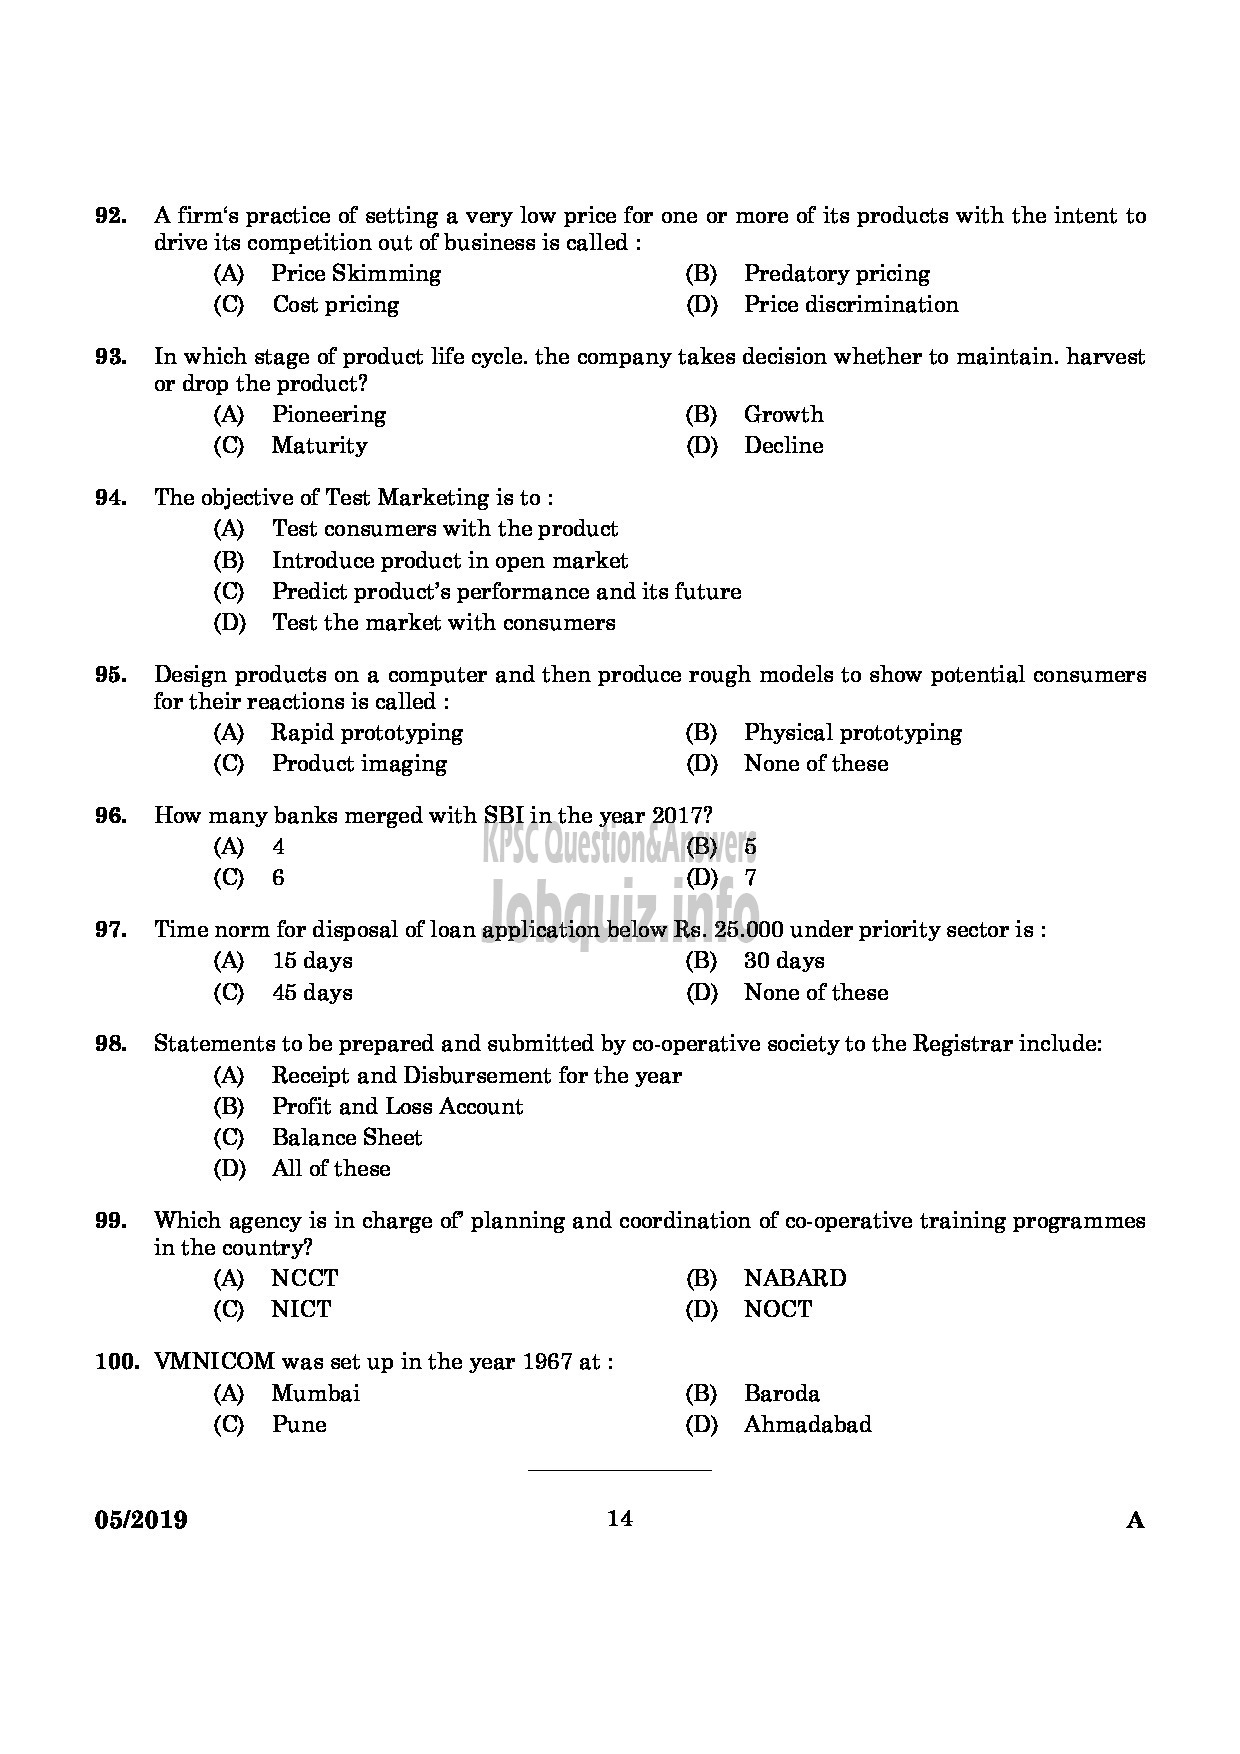 Kerala PSC Question Paper - BRANCH MANAGER DISTRICT COOPERATIVE BANK English-12